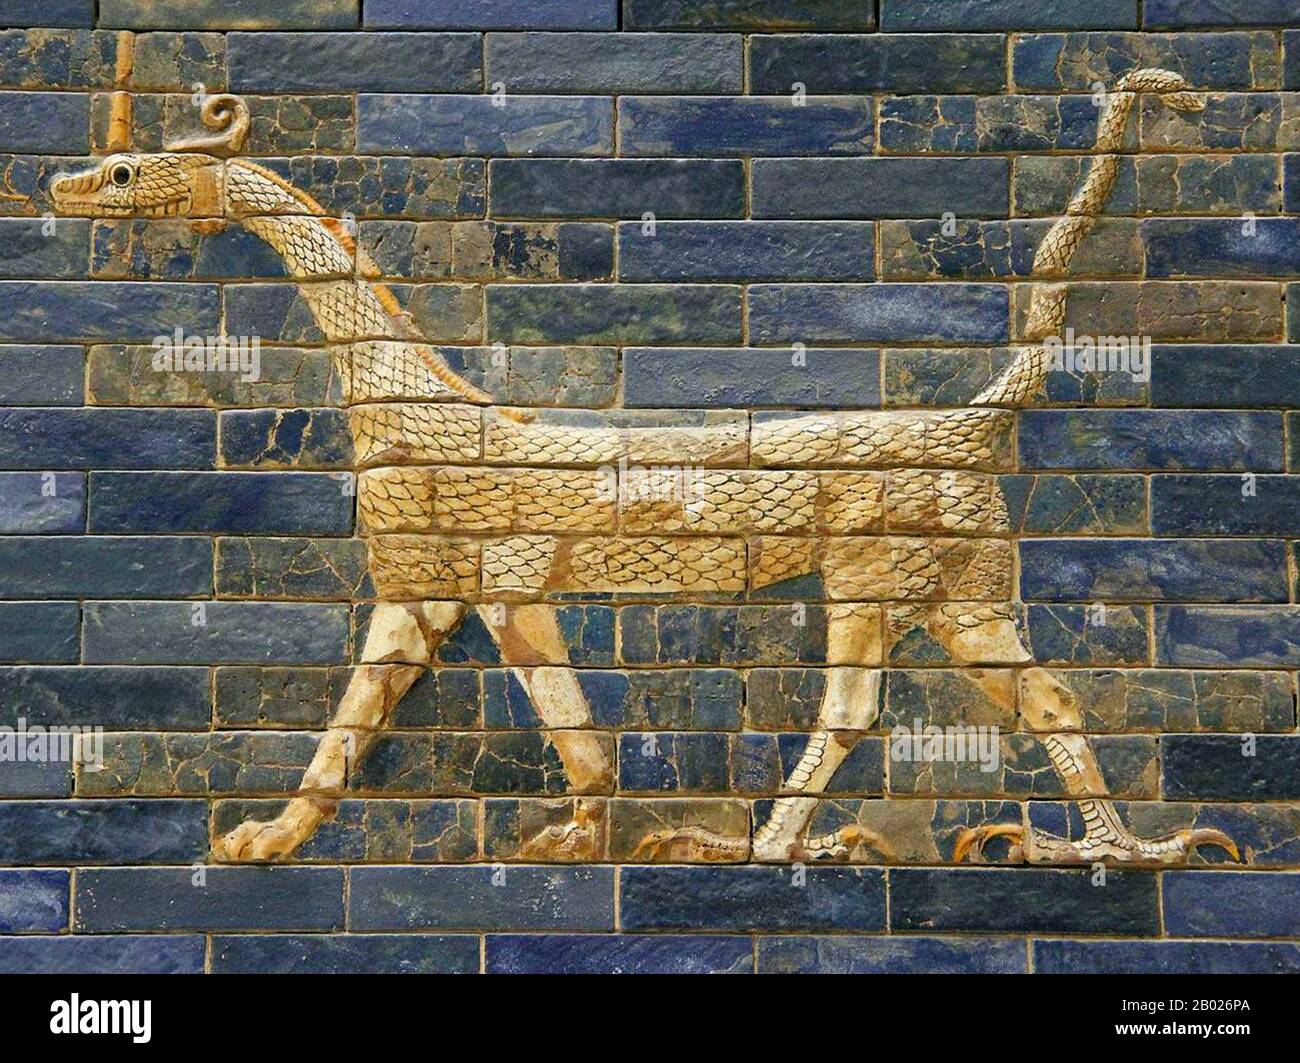 The Ishtar Gate (Persian: دروازه ایشتار)(Arabic: بوابة عشتار) was the eighth gate to the inner city of Babylon. It was constructed in about 575 BC by order of King Nebuchadnezzar II on the north side of the city.  Dedicated to the Babylonian goddess Ishtar, the gate was constructed using glazed brick with alternating rows of bas-relief mušḫuššu (dragons) and aurochs.  The roof and doors of the gate were of cedar, according to the dedication plaque. Through the gate ran the Processional Way, which was lined with walls covered in lions on glazed bricks (about 120 of them). Ishtar Gate has only Stock Photo